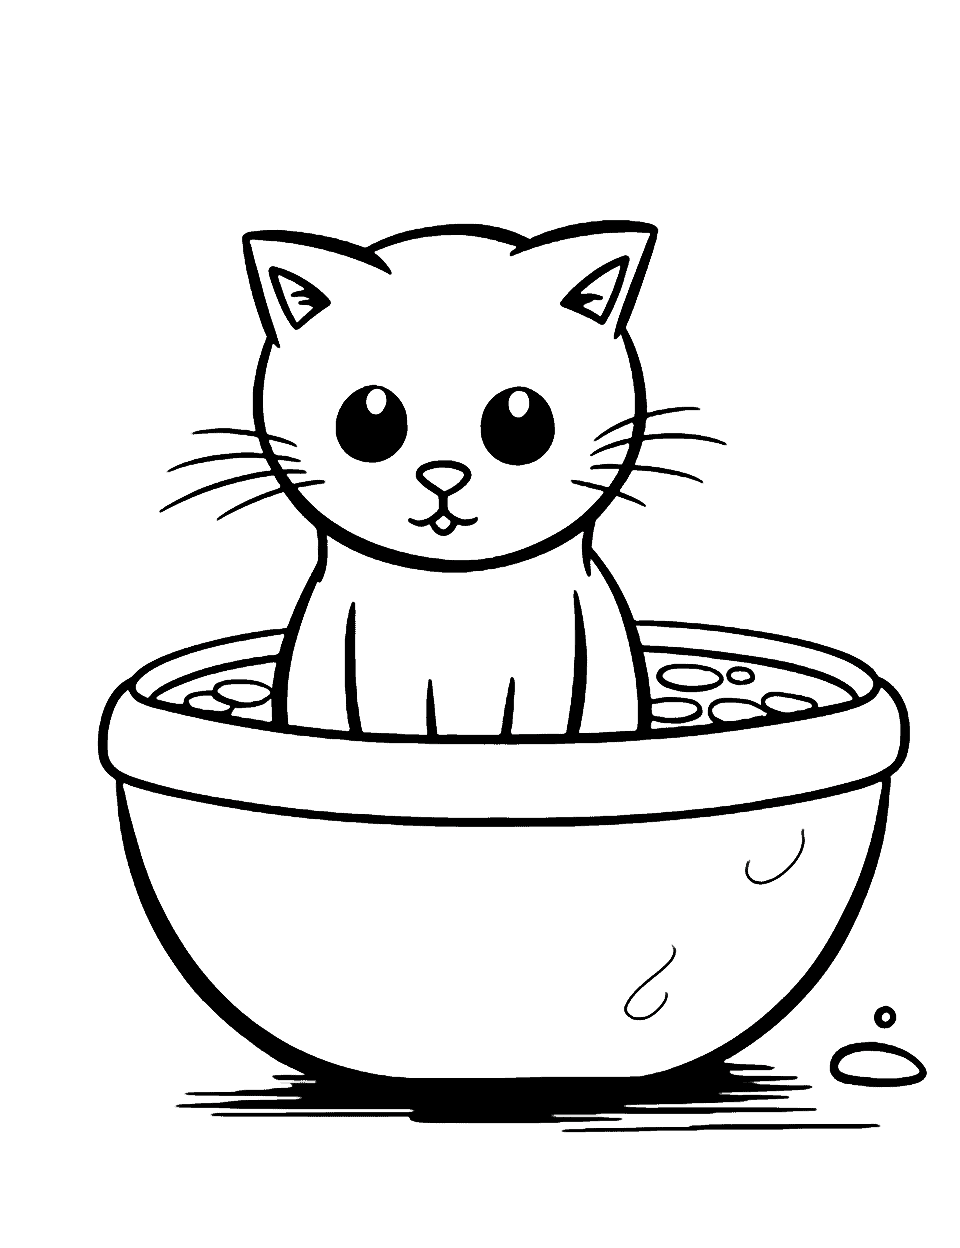 Simple Cat in a Bowl Coloring Page - A simple image of a cat sitting inside of a bowl, perfect for beginners.